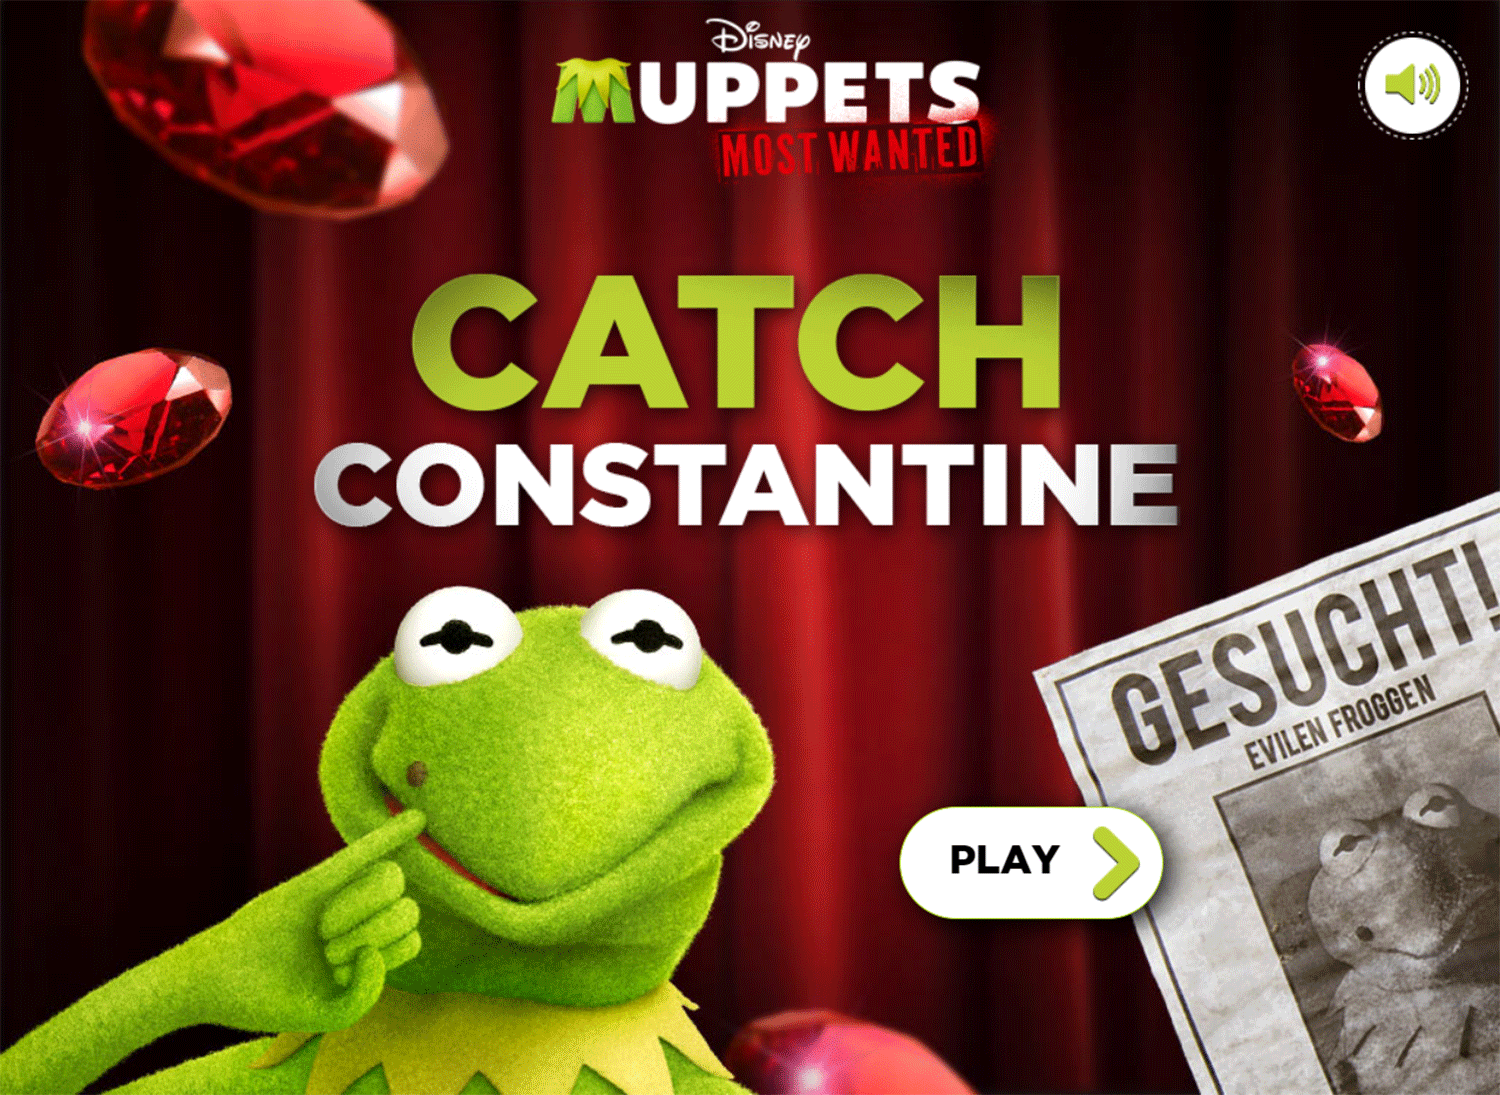 Muppets Most Wanted Catch Constantine Game Welcome Screen Screenshot.